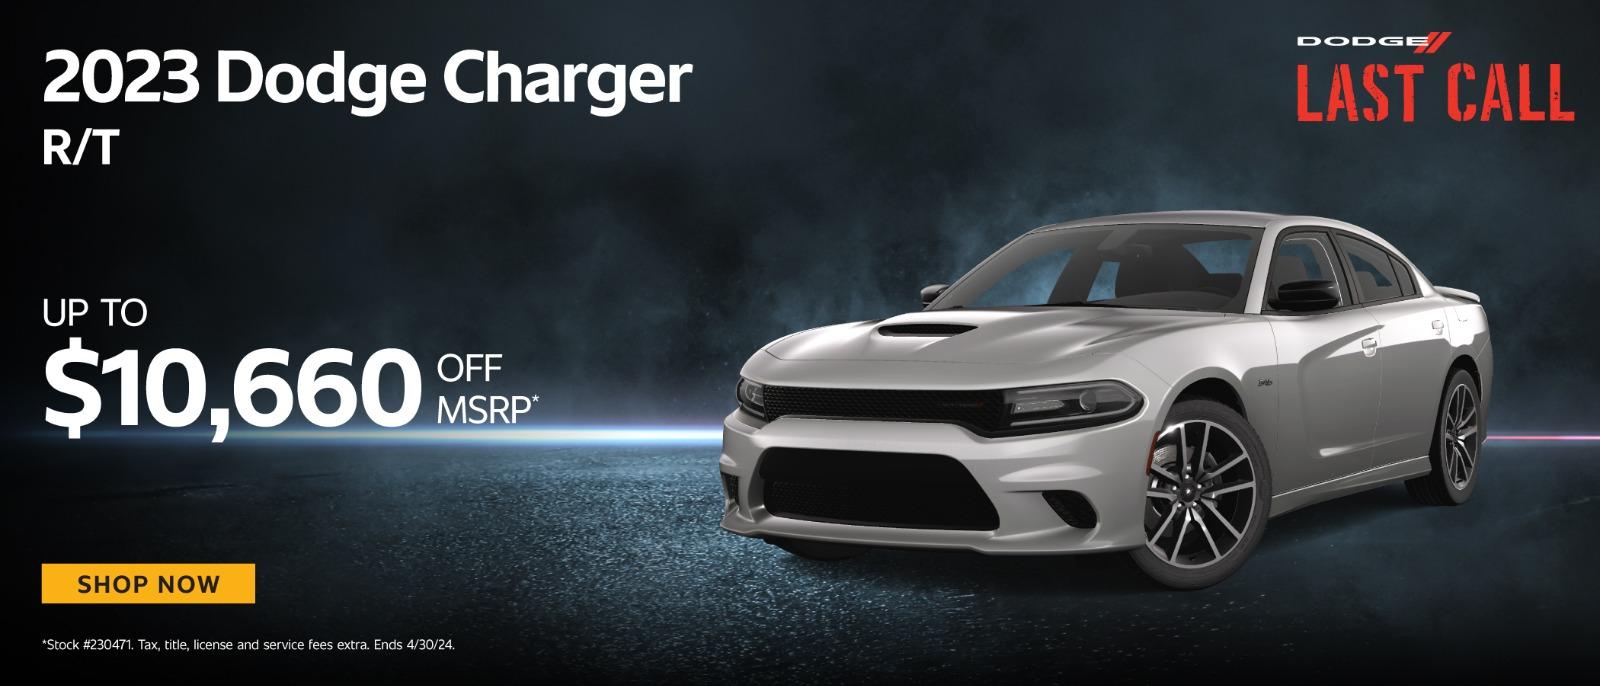 2023 Dodge Charger up to $10,660 off MSRP